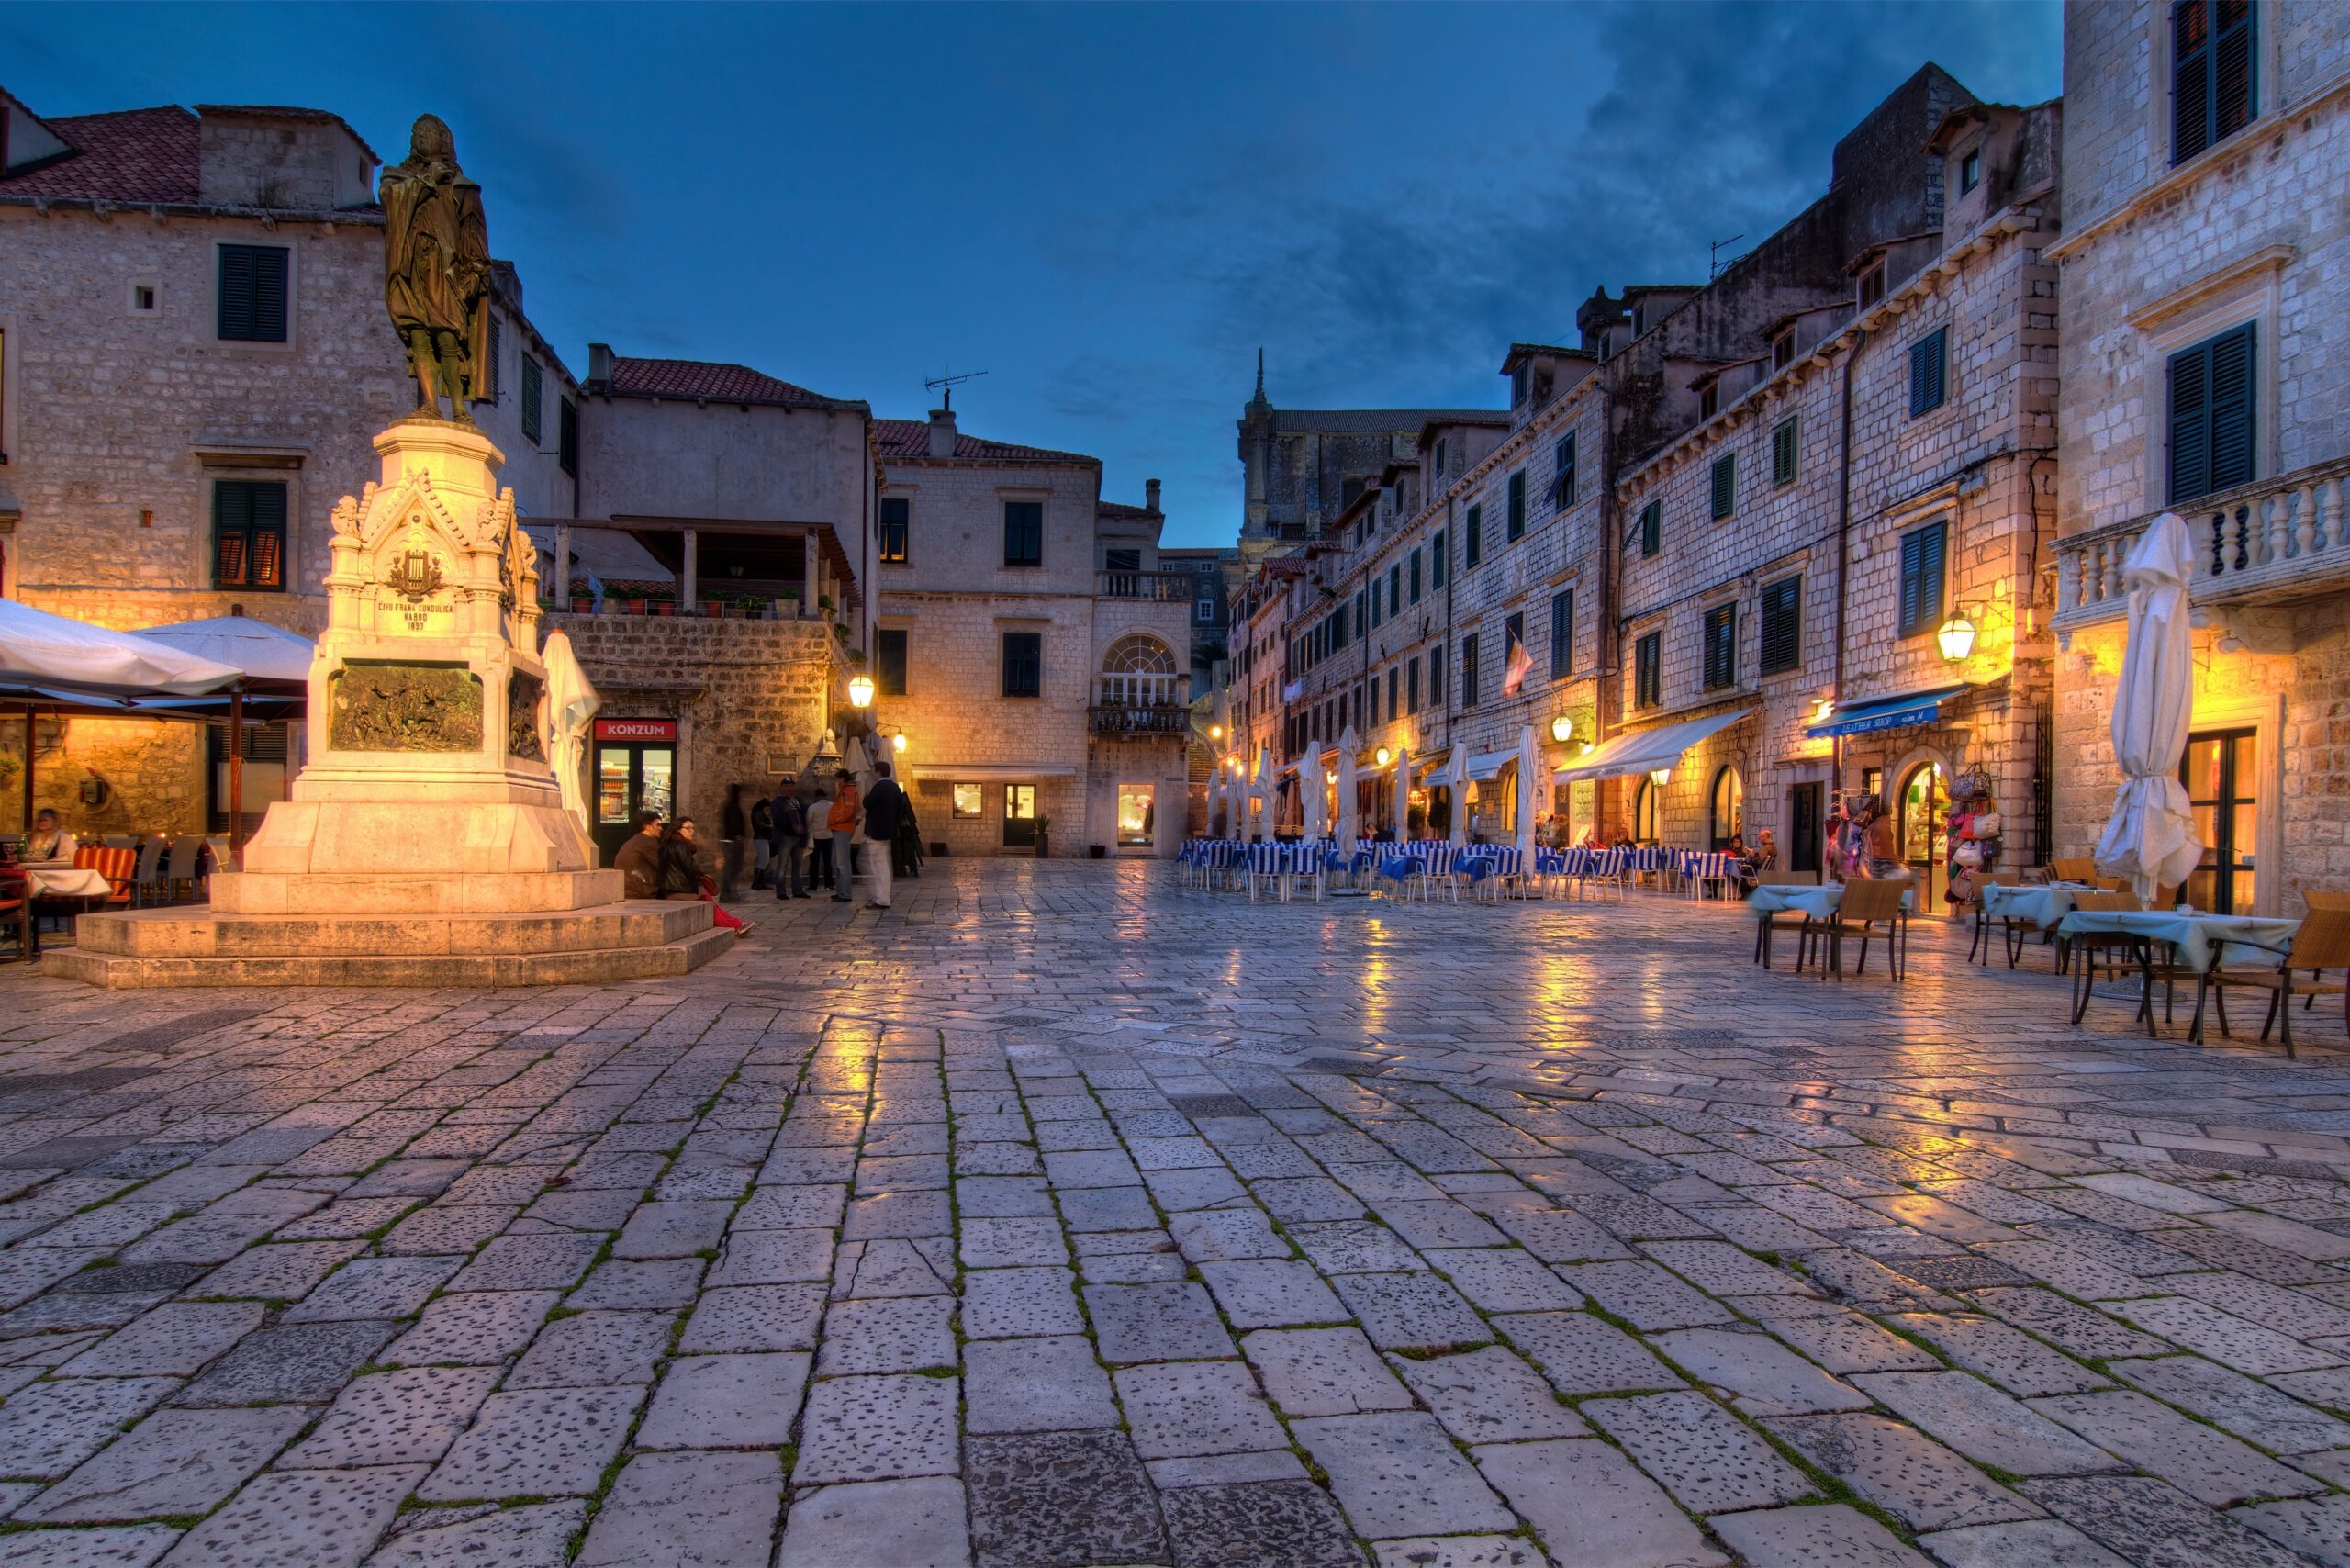 Dubrovnik old town in a night time